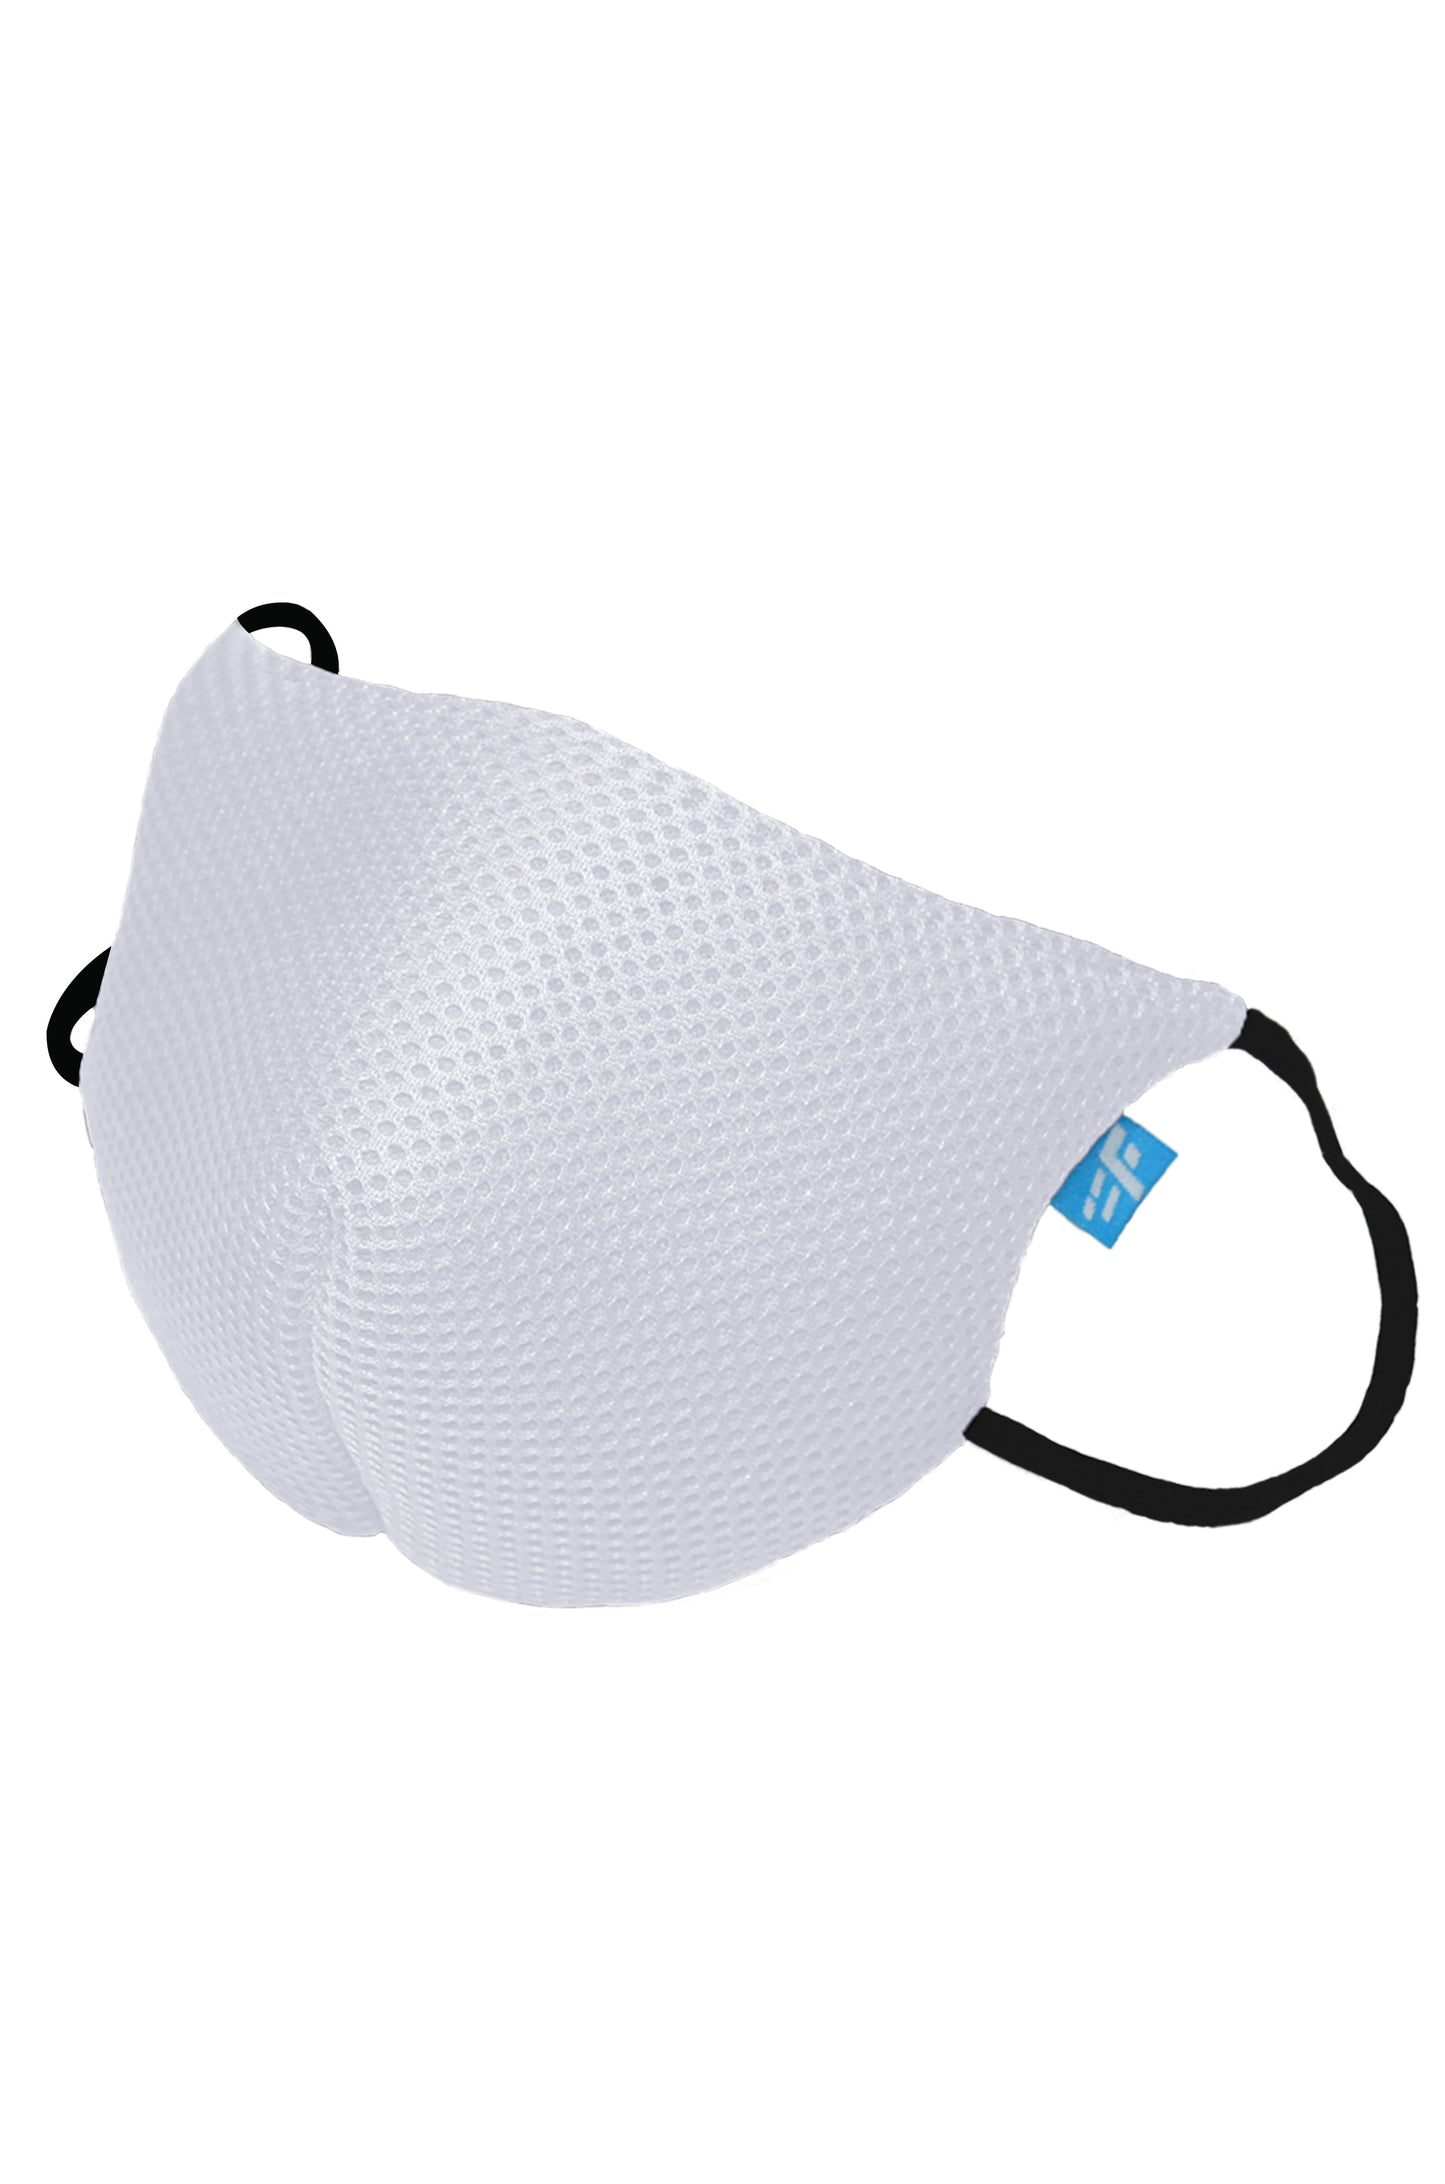 F Gear Coroguard F95 Mask White Pack of 1 Safeguard 7 layer ISO CE SITRA lab certified >95% Bacteria Filtration